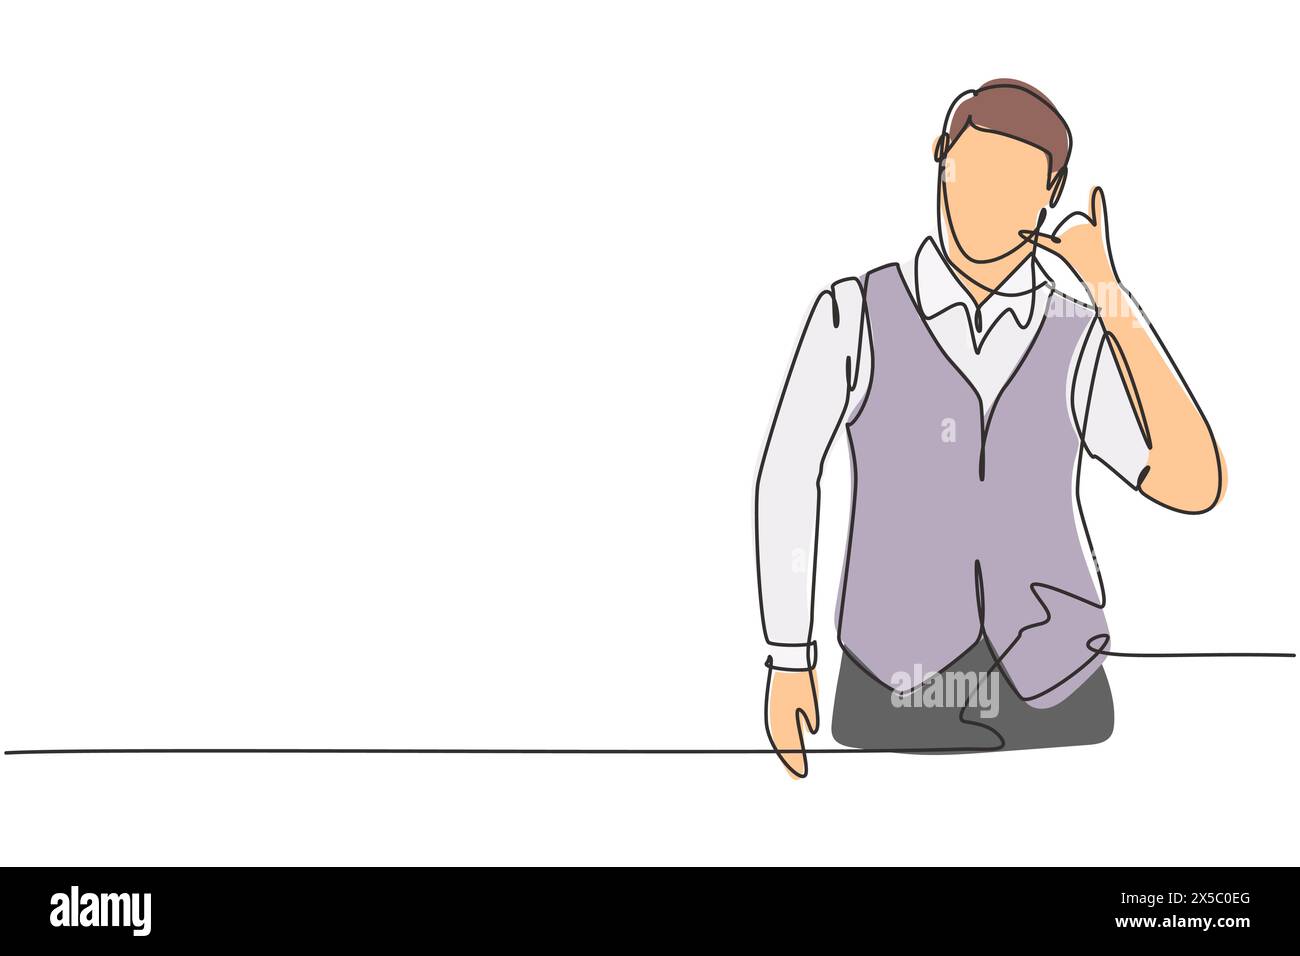 Continuous one line drawing steward with call me gesture ready to serve airplane passengers in a friendly and warm manner. Professional person. Single Stock Vector